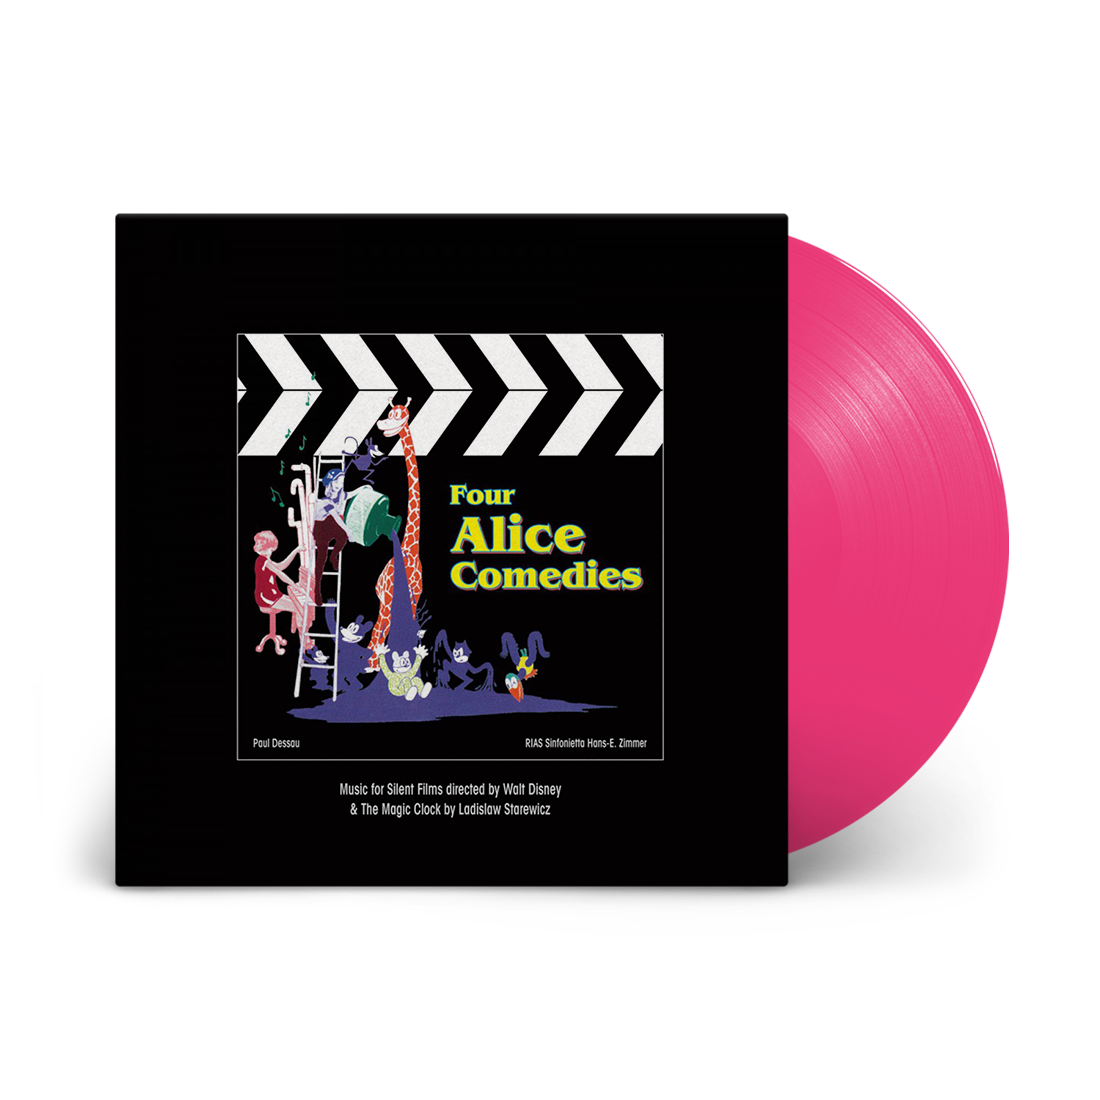 Four Alice Comedies: Limited Edition Pink Vinyl LP